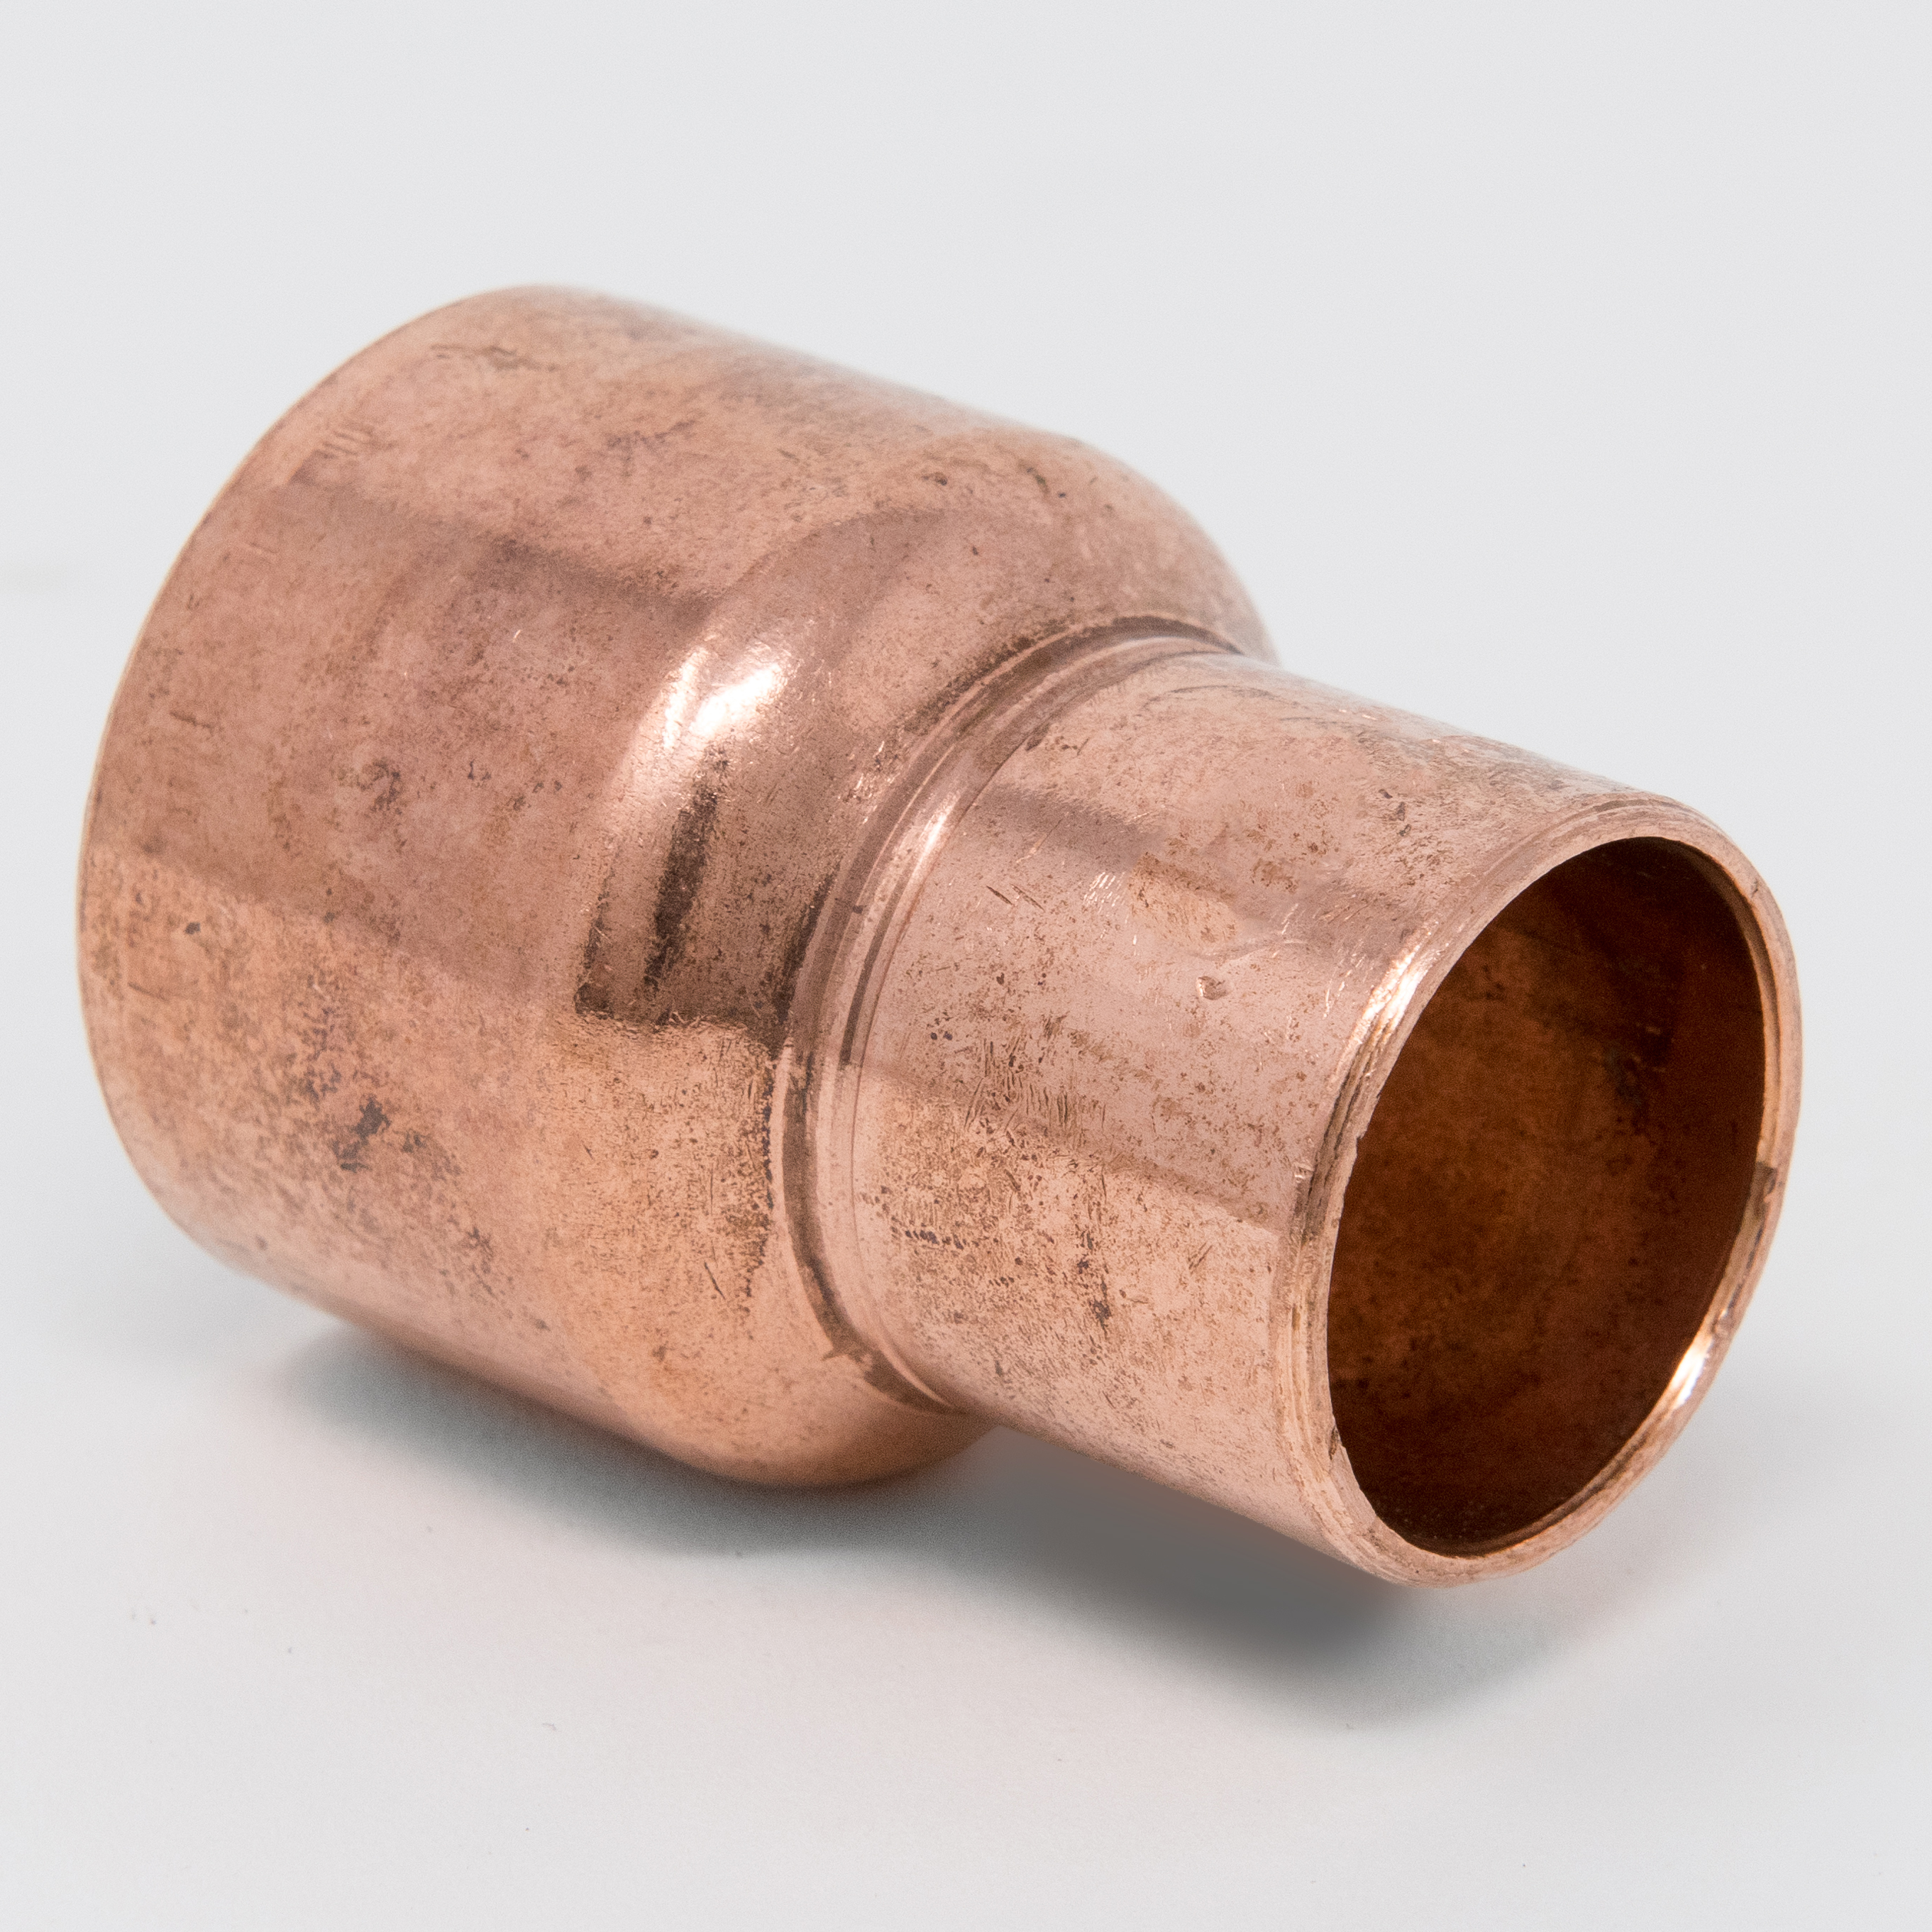 Streamline® W 01056 Reducing Coupling, 1-1/4 x 1 in Nominal, C End Style, Wrot Copper, Domestic